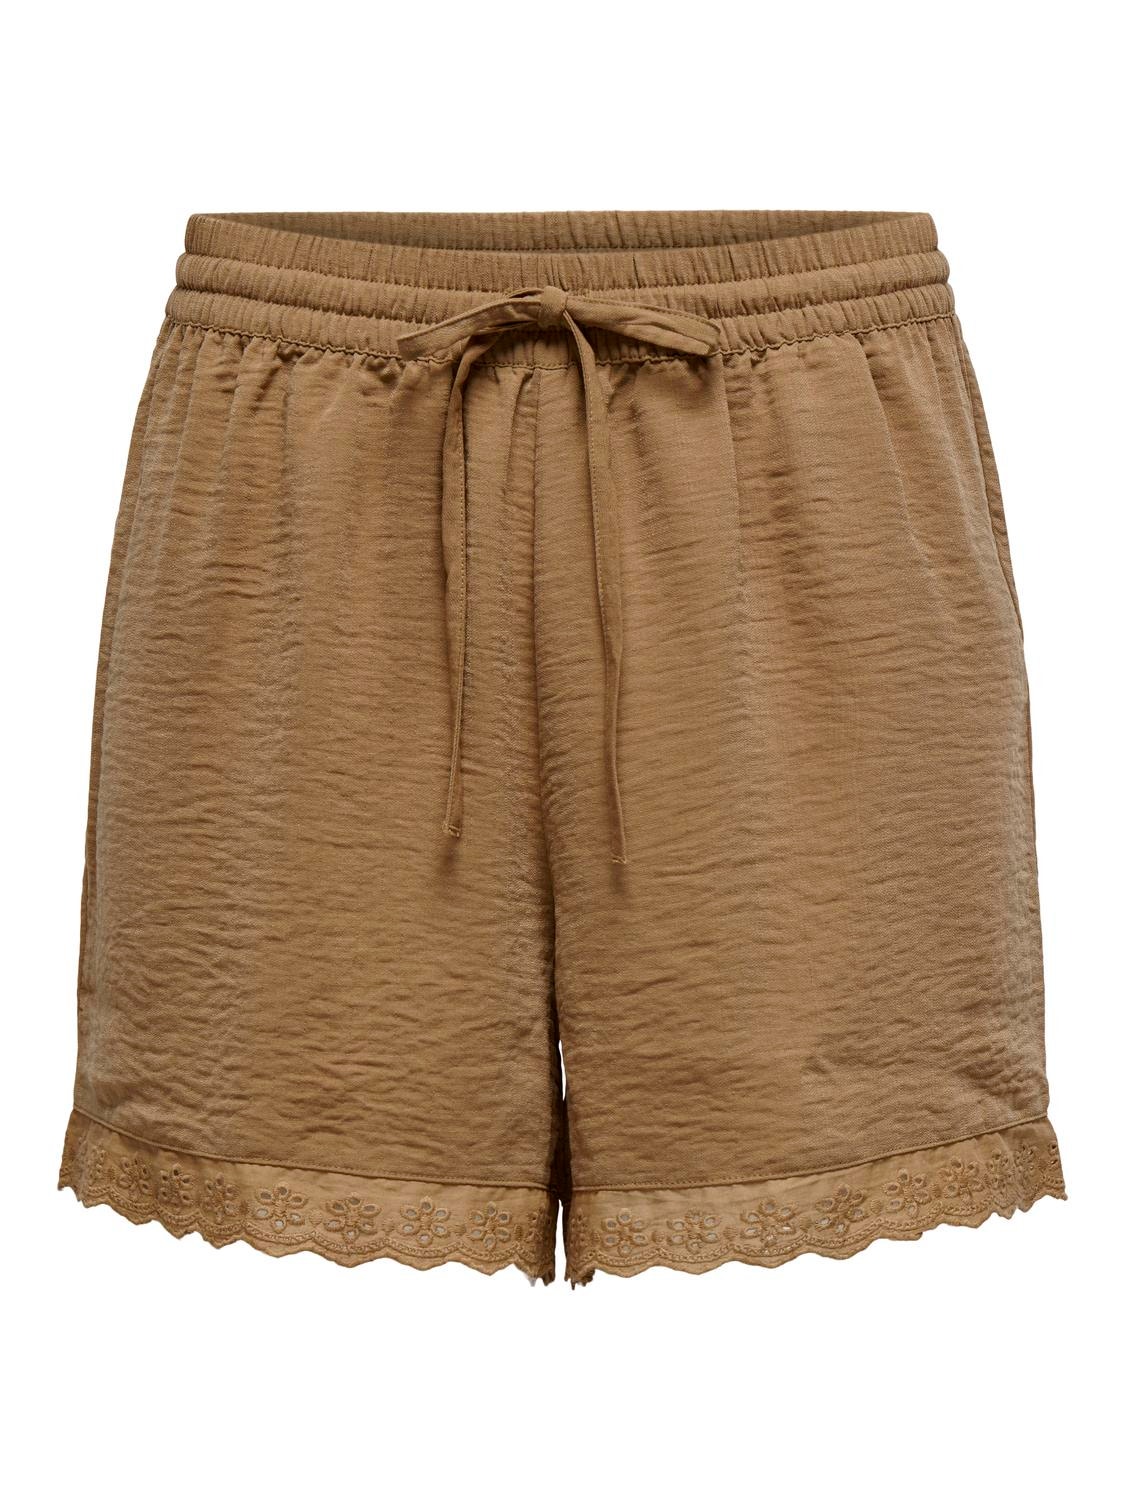 ONLY Shorts With Lace Edge -Toasted Coconut - 15295675